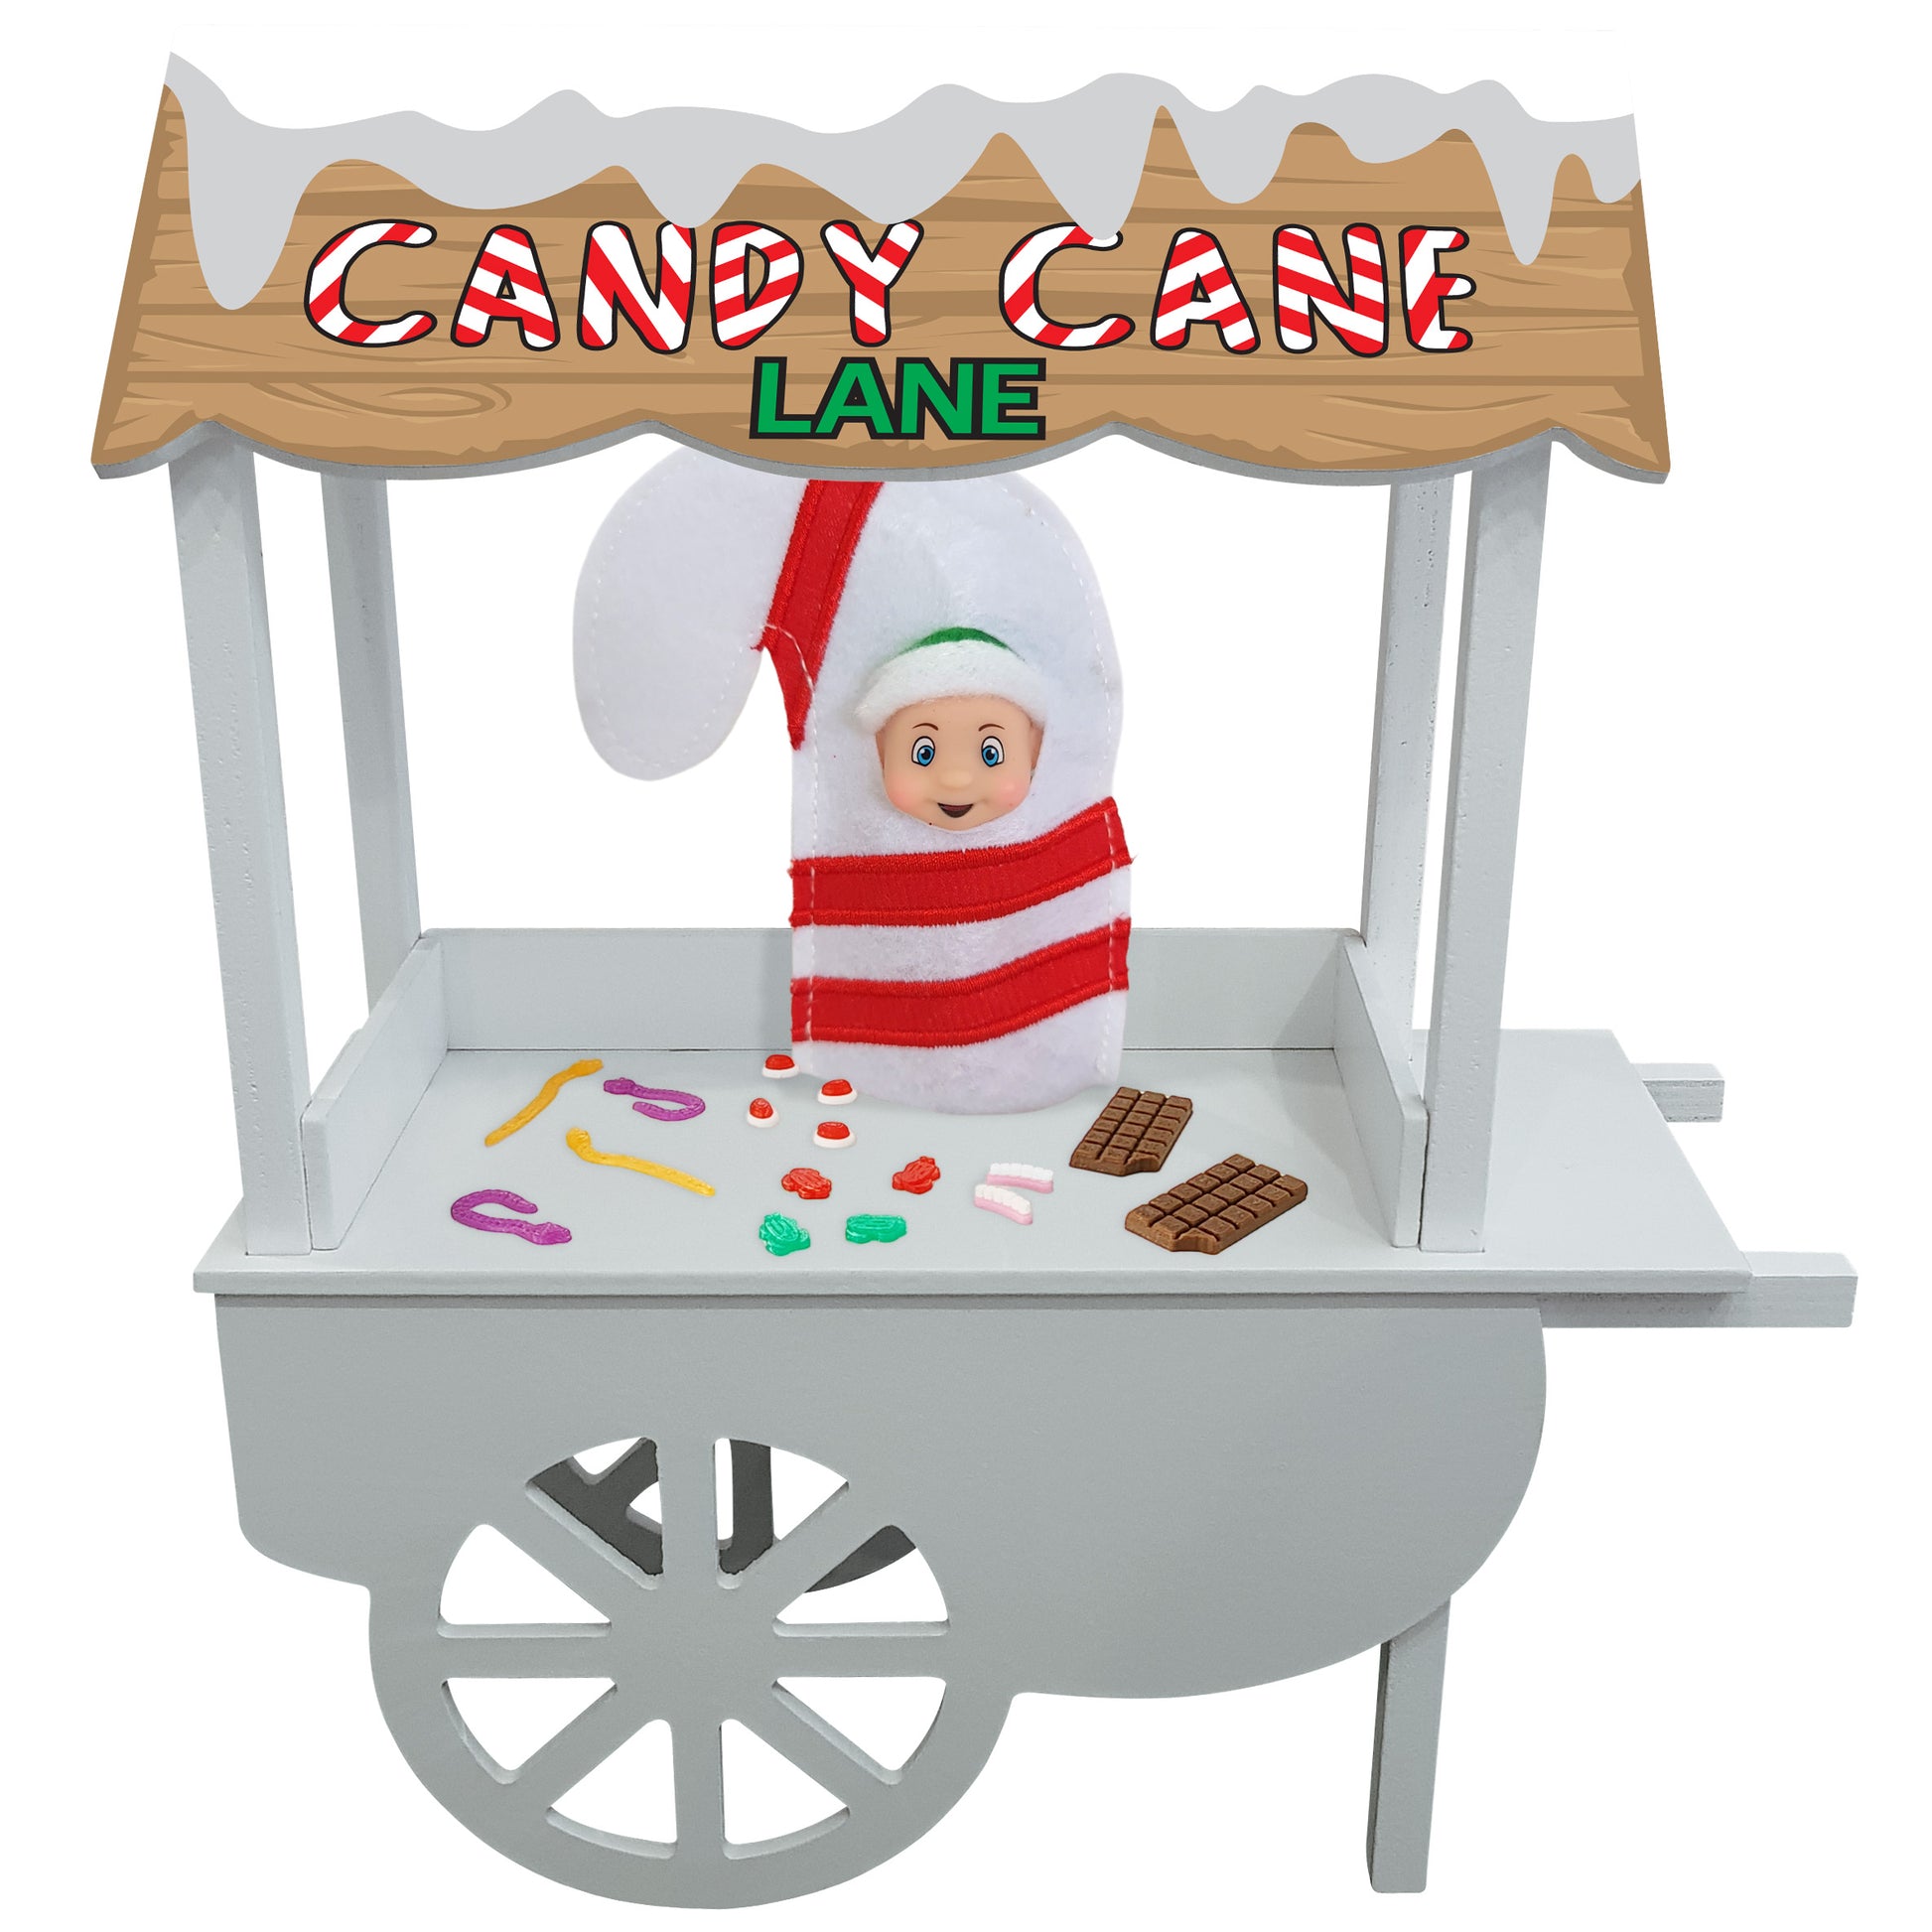 Elf candy store with a miniature baby candy cane, chocolate and lollies